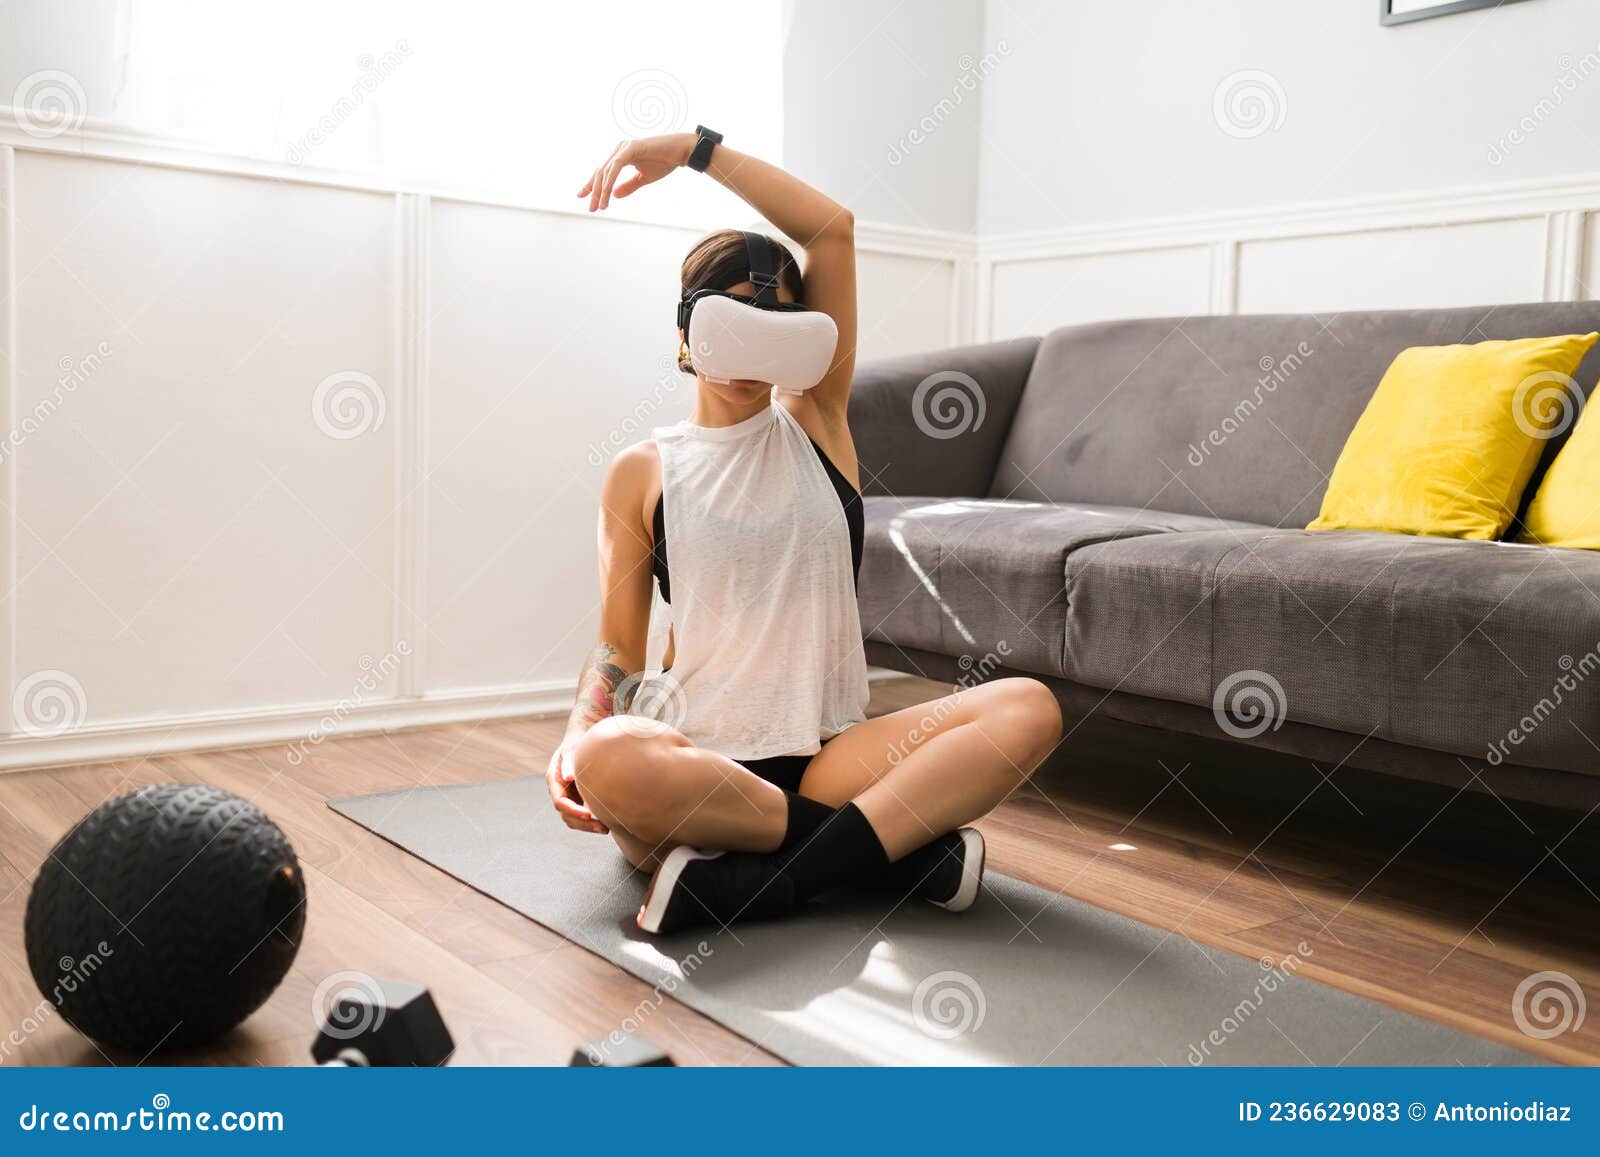 sporty woman in an immersive simulation